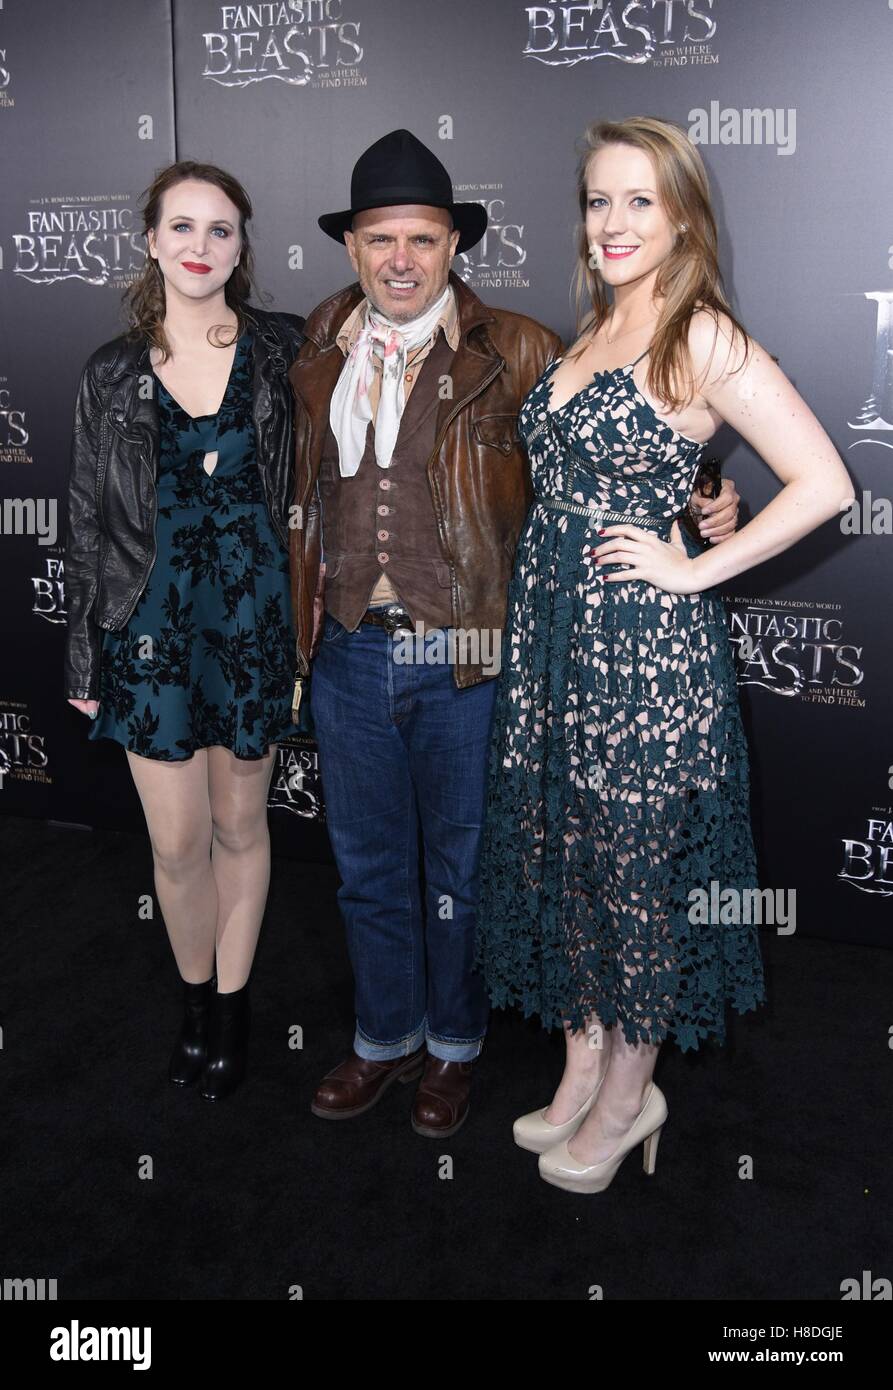 New York, NY, USA. 10th Nov, 2016. Joe Pantoliano, Michelle Pantoliano, Isabella Pantoliano at arrivals for FANTASTIC BEASTS AND WHERE TO FIND THEM World Premiere, Alice Tully Hall at Lincoln Center, New York, NY November 10, 2016. Credit:  Derek Storm/Everett Collection/Alamy Live News Stock Photo